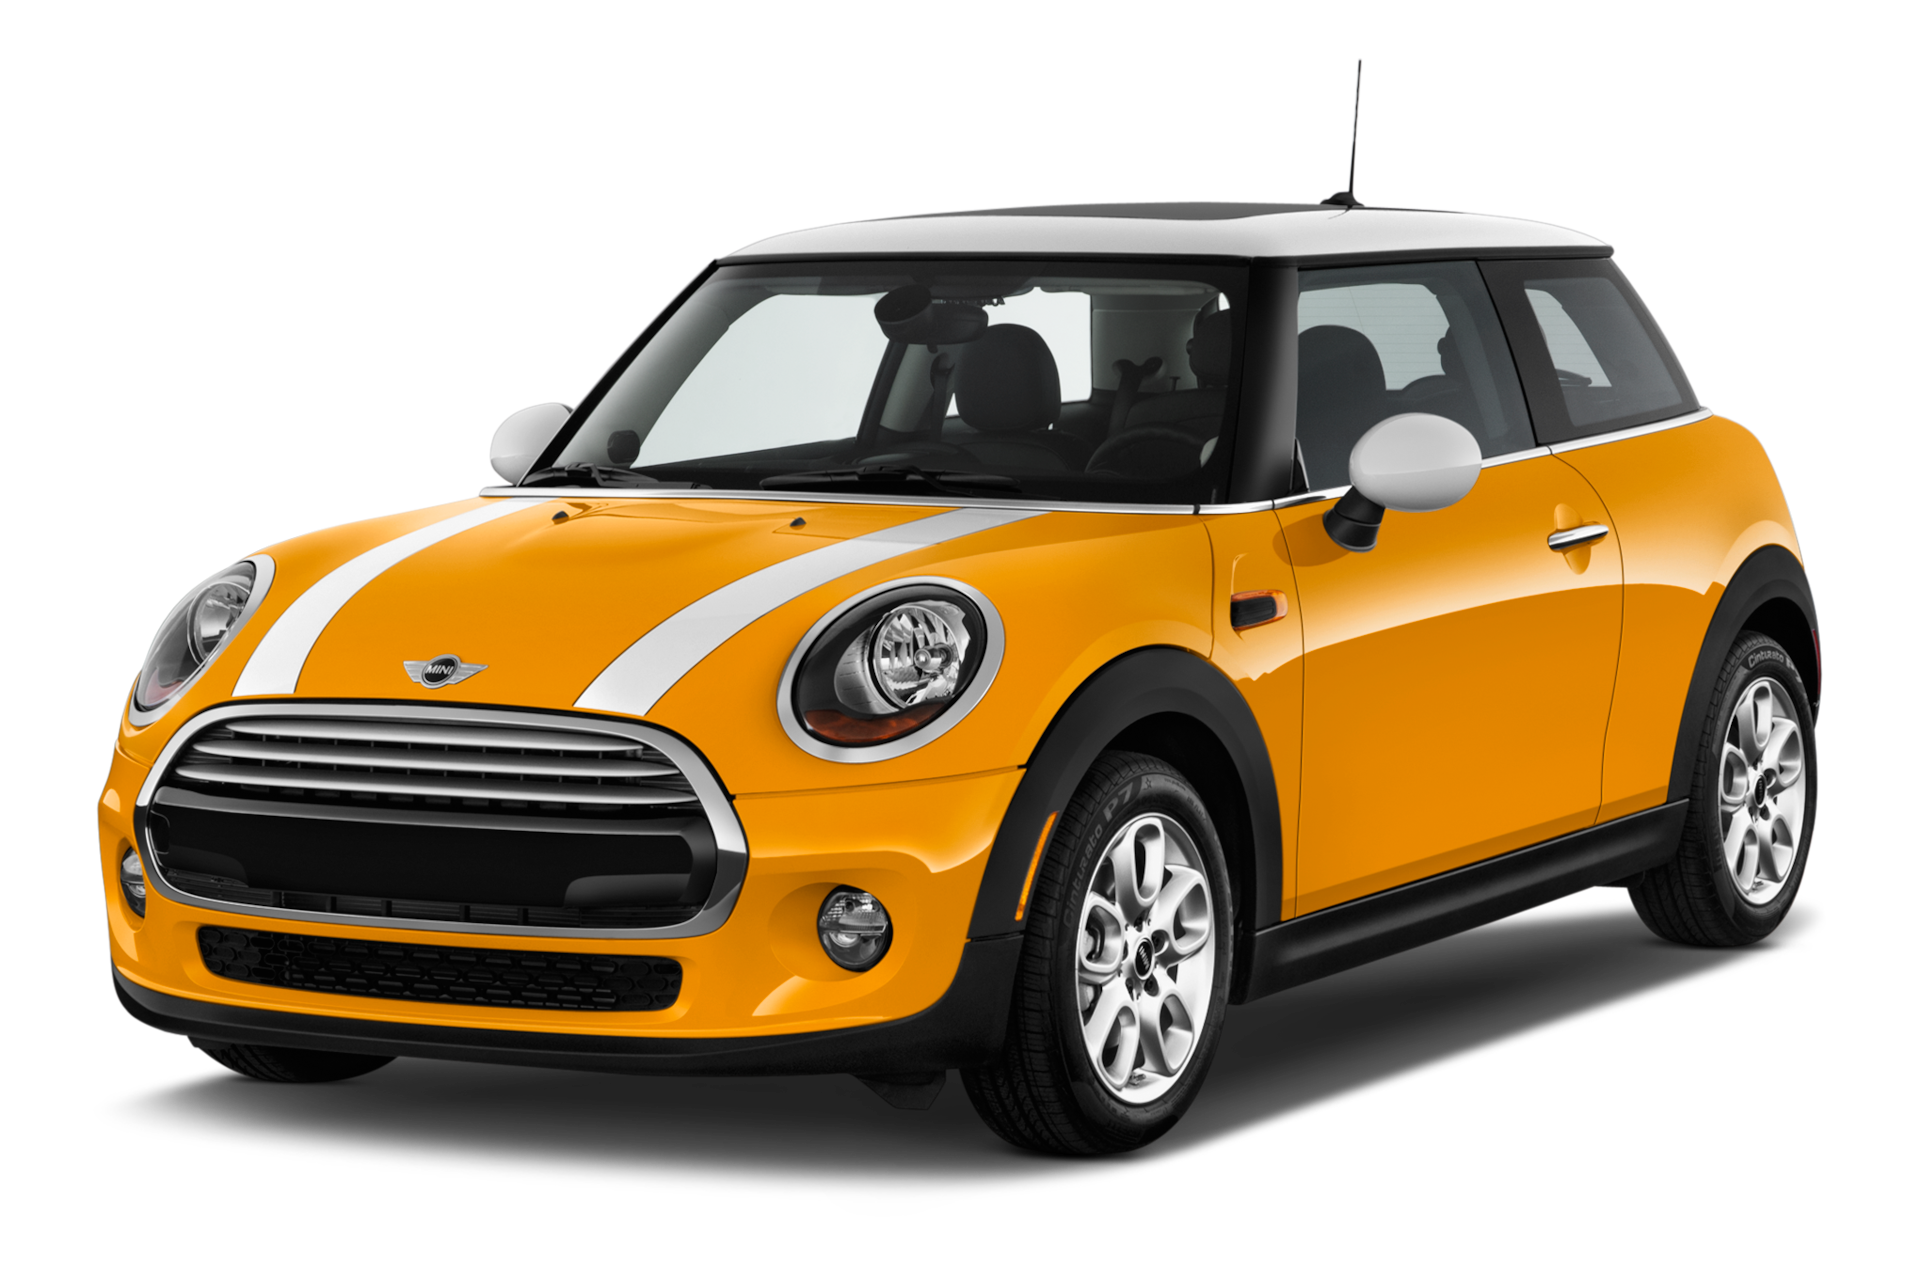 2017 MINI Hardtop Prices, Reviews, and Photos - MotorTrend